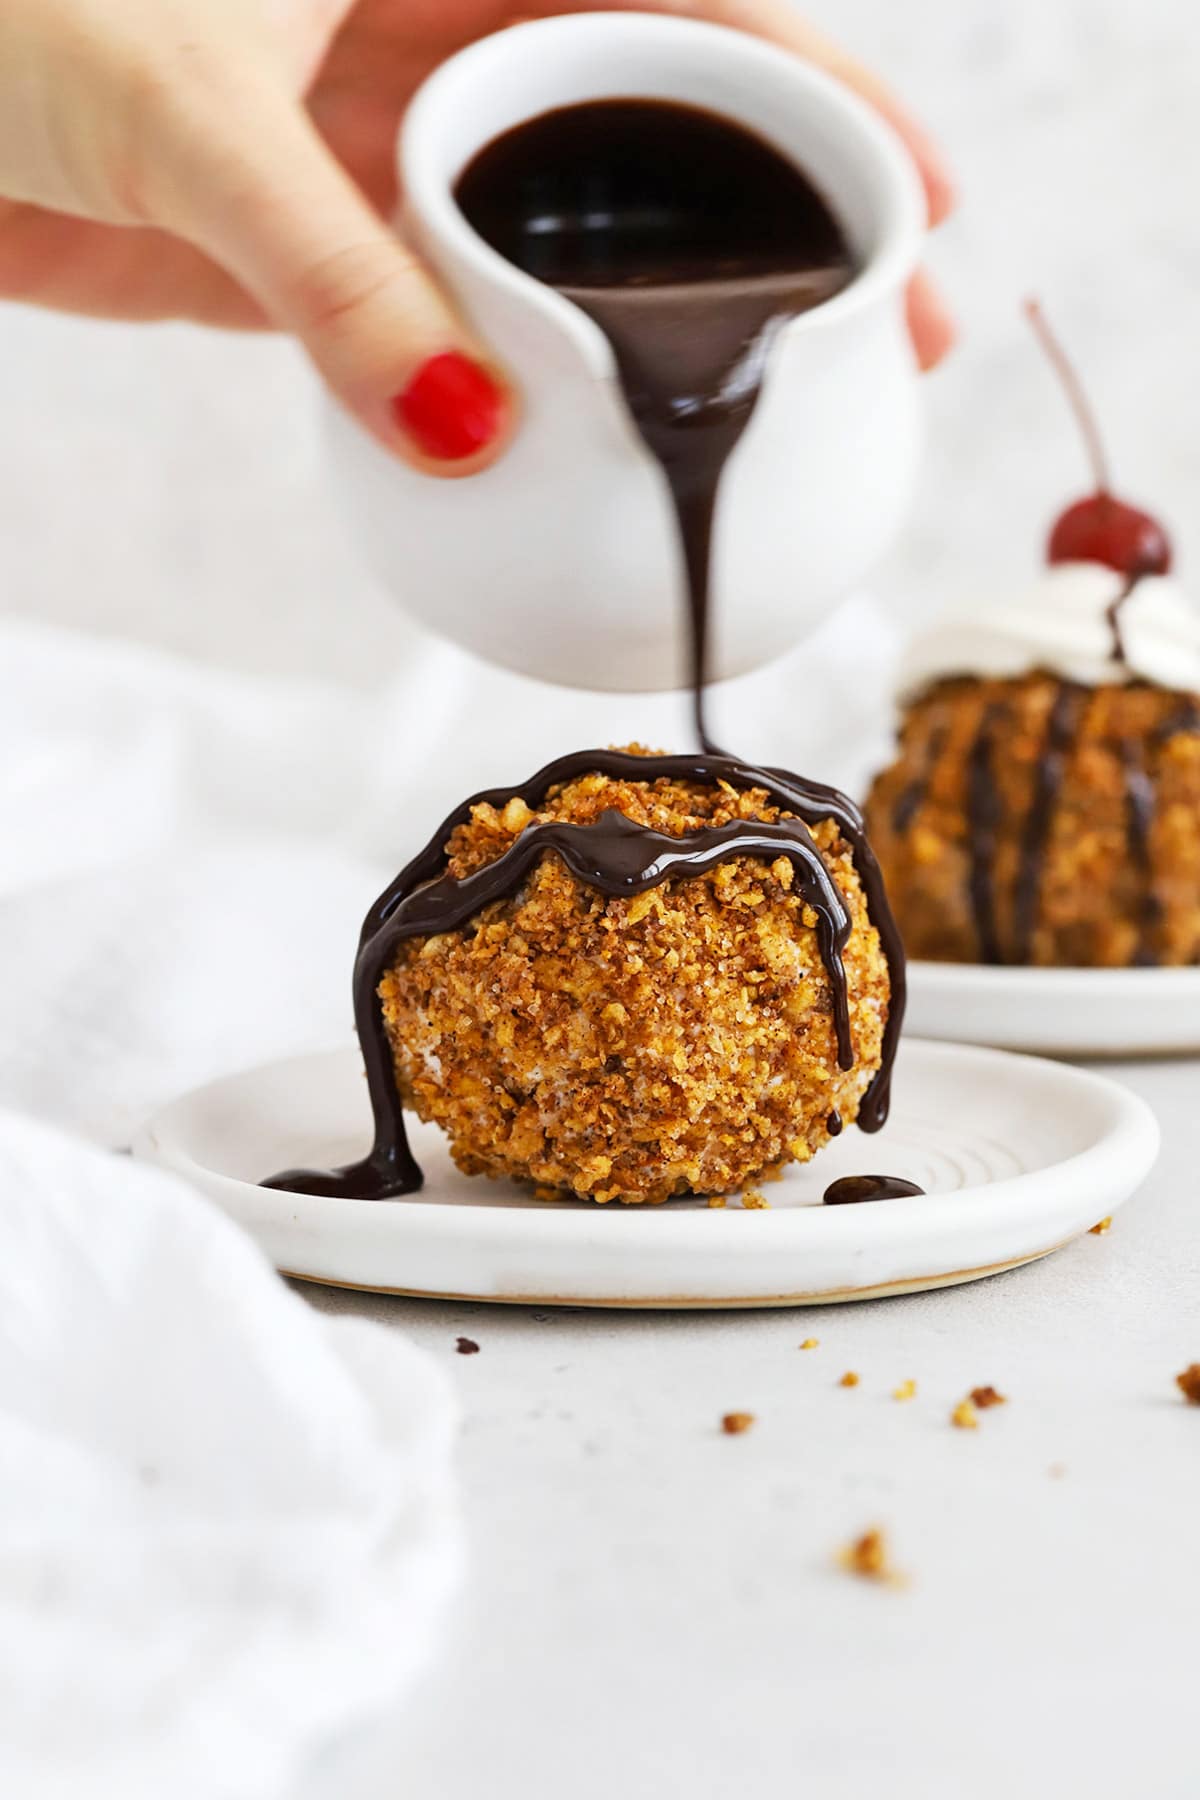 Drizzling chocolate sauce over a scoop of gluten-free fried ice cream